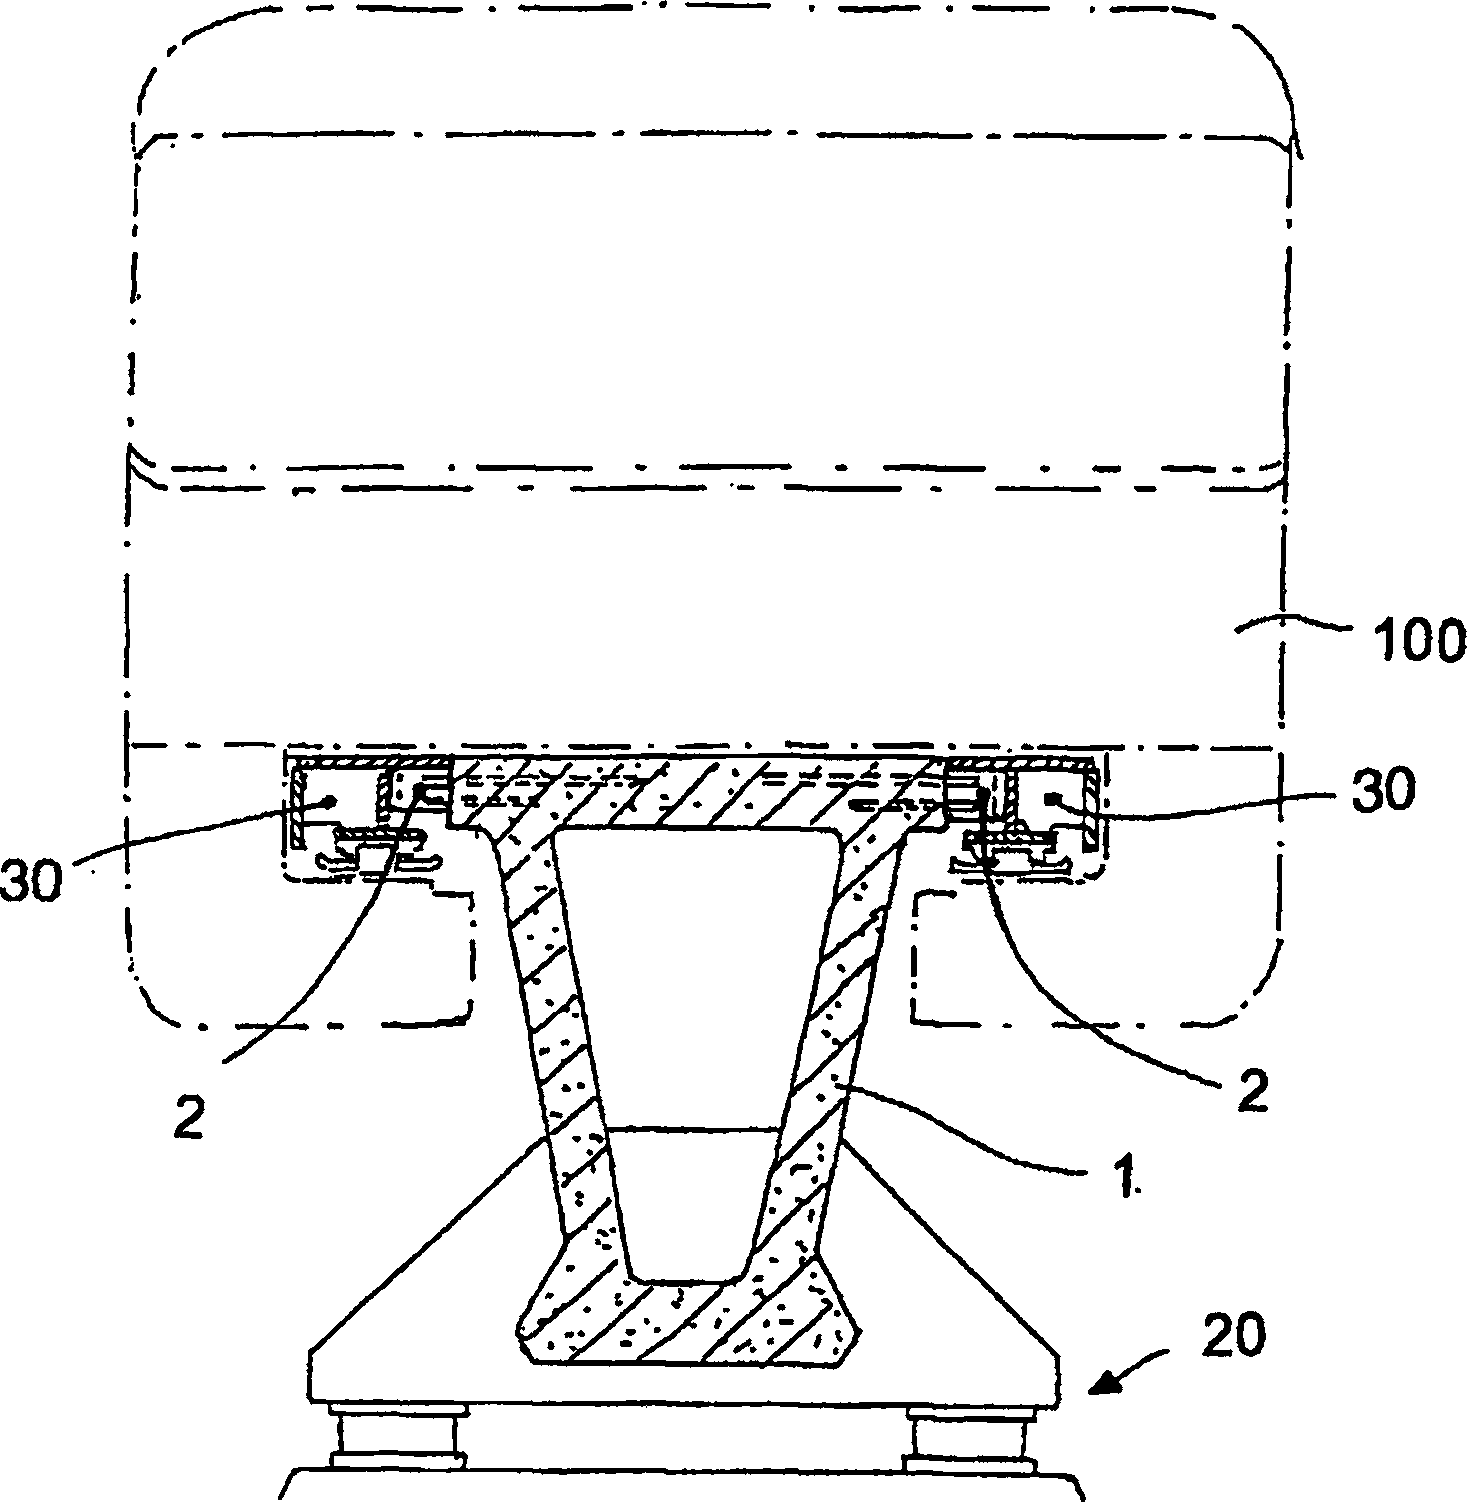 Support for a railborne vehicle and console